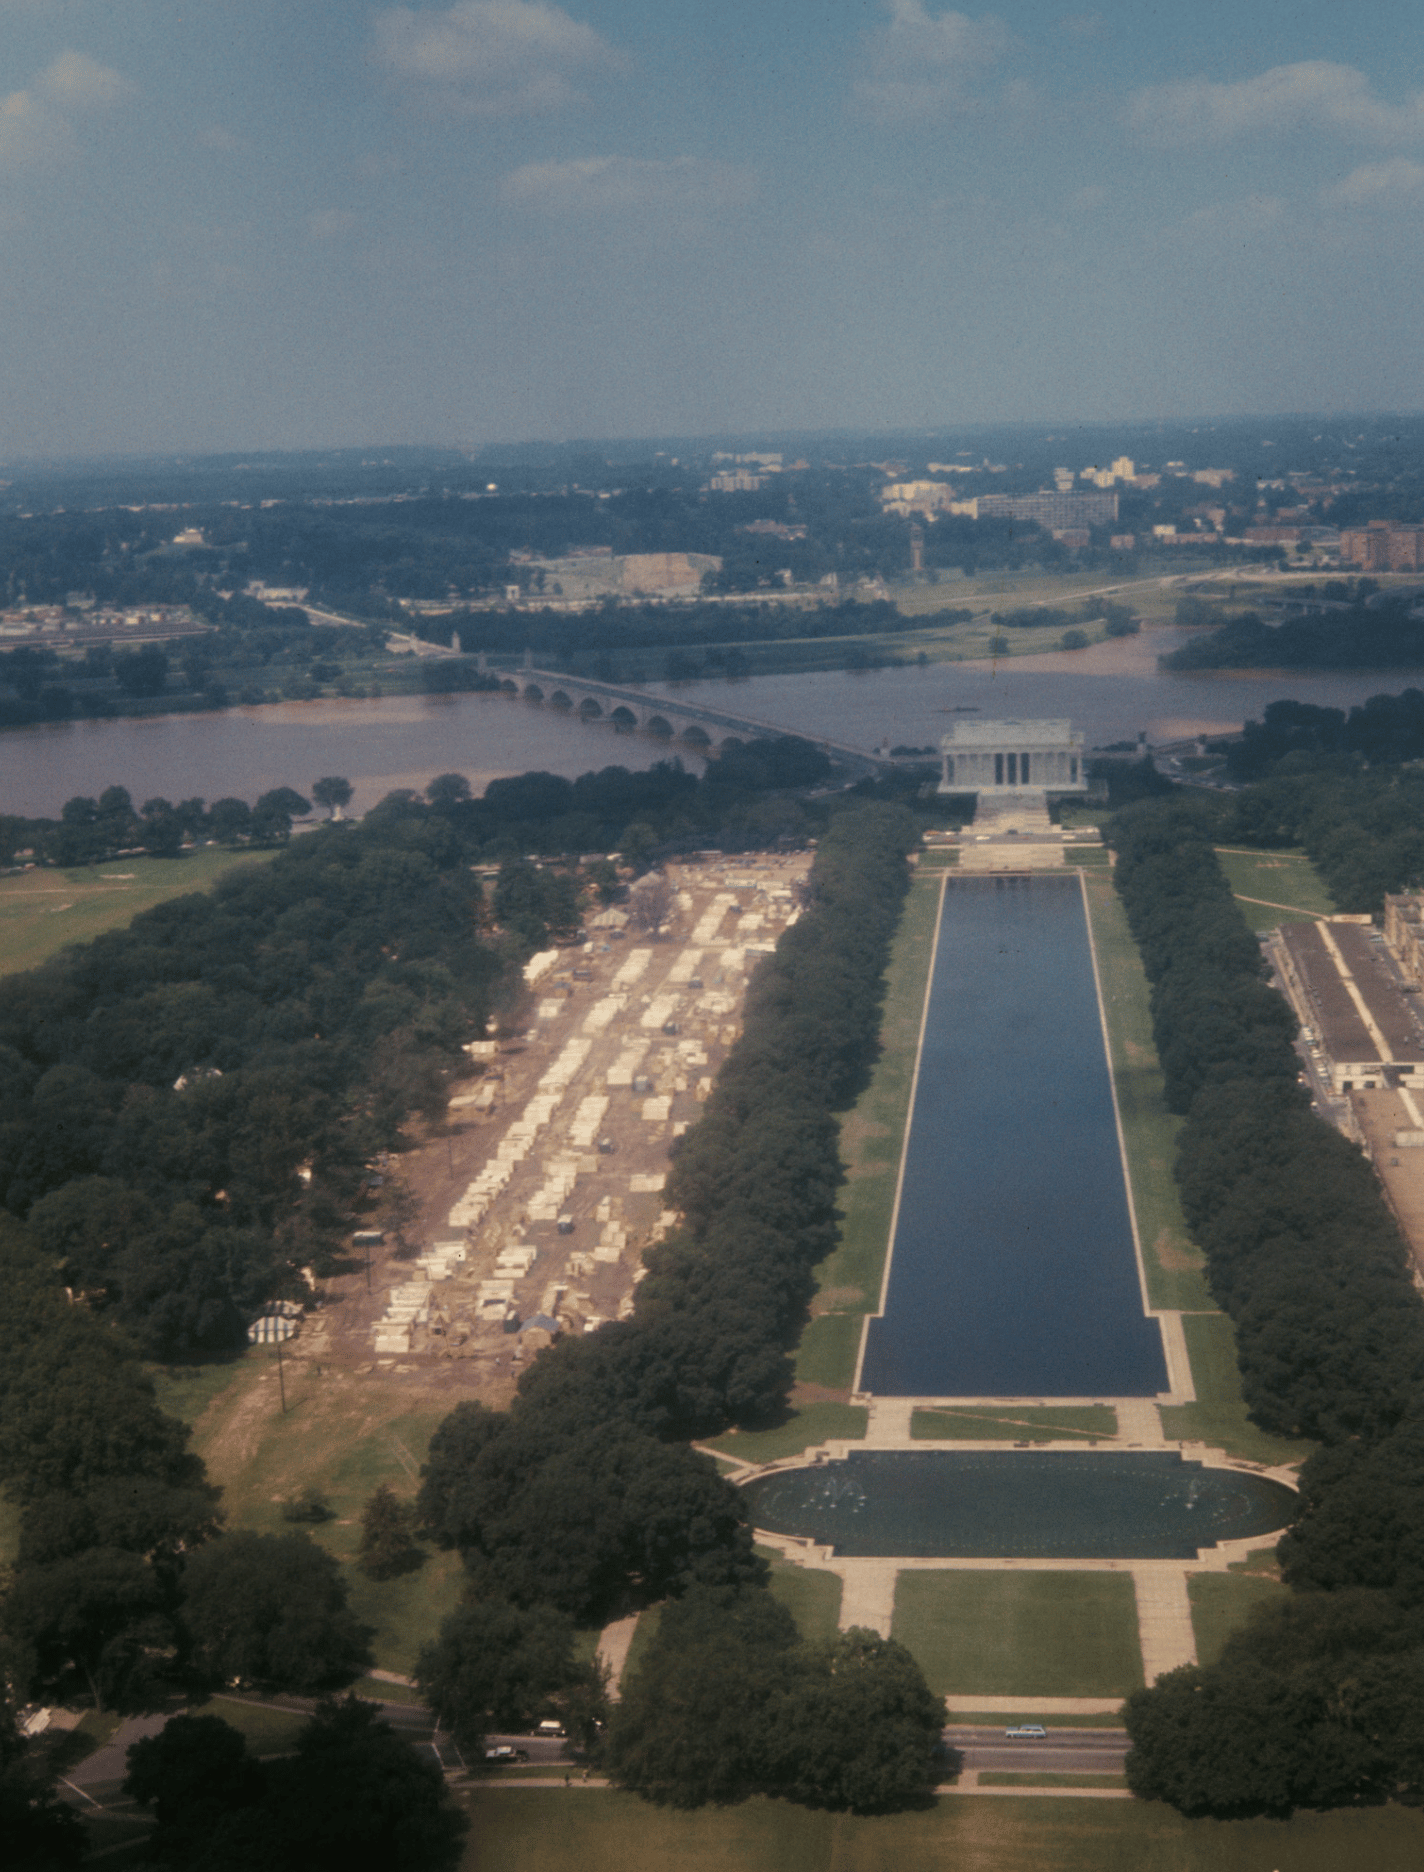 Photograph of Resurrection City on the National Mall taken by one of its lead architects, Ken Jadin, 1968.
Smithsonian National Museum of African American History and Culture, Gift of P. Kenneth Jadin © P. Kenneth Jadin